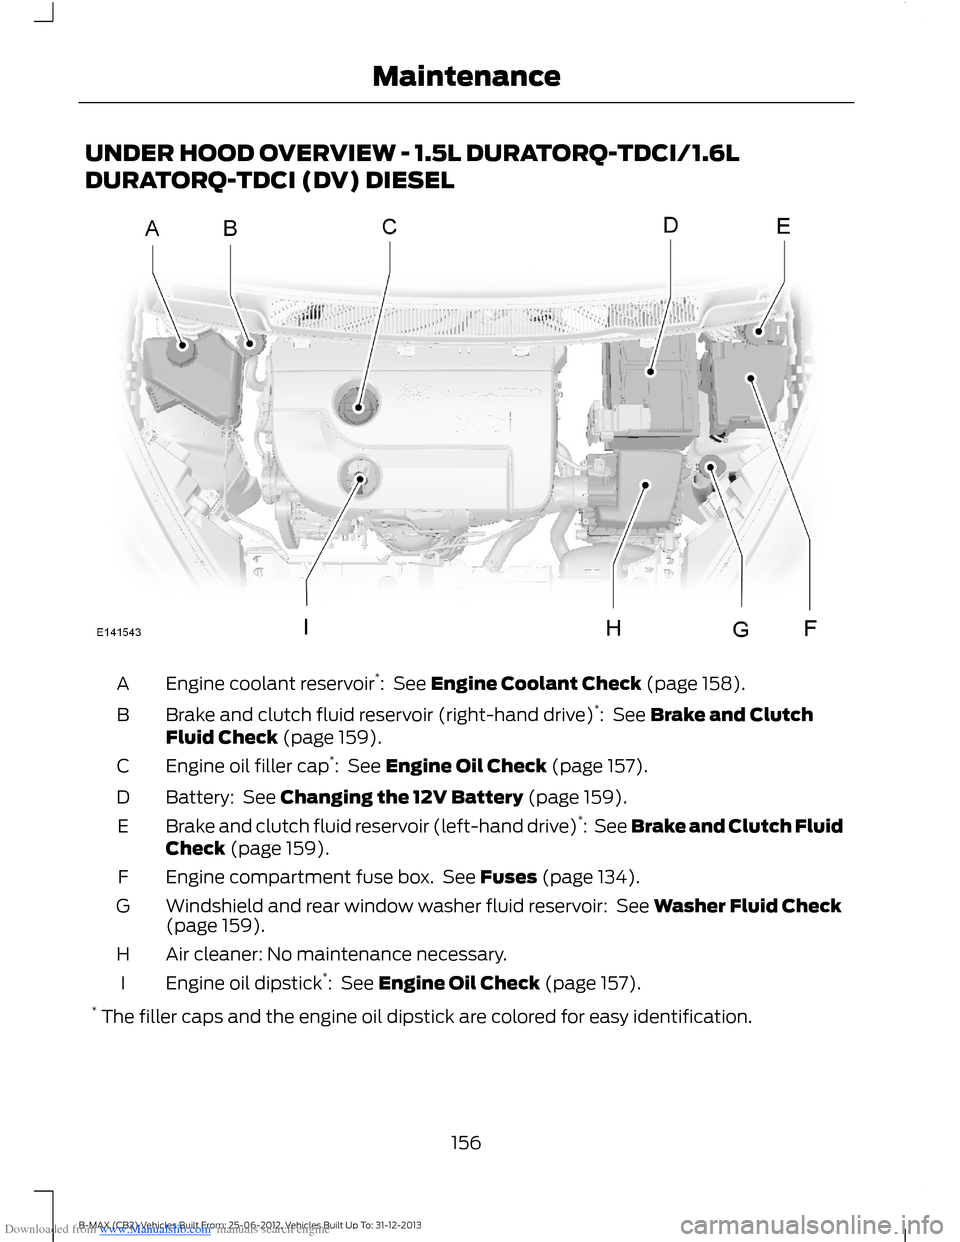 FORD B MAX 2013 1.G User Guide Downloaded from www.Manualslib.com manuals search engine UNDER HOOD OVERVIEW - 1.5L DURATORQ-TDCI/1.6L
DURATORQ-TDCI (DV) DIESEL
Engine coolant reservoir*:  See Engine Coolant Check (page 158).A
Brake